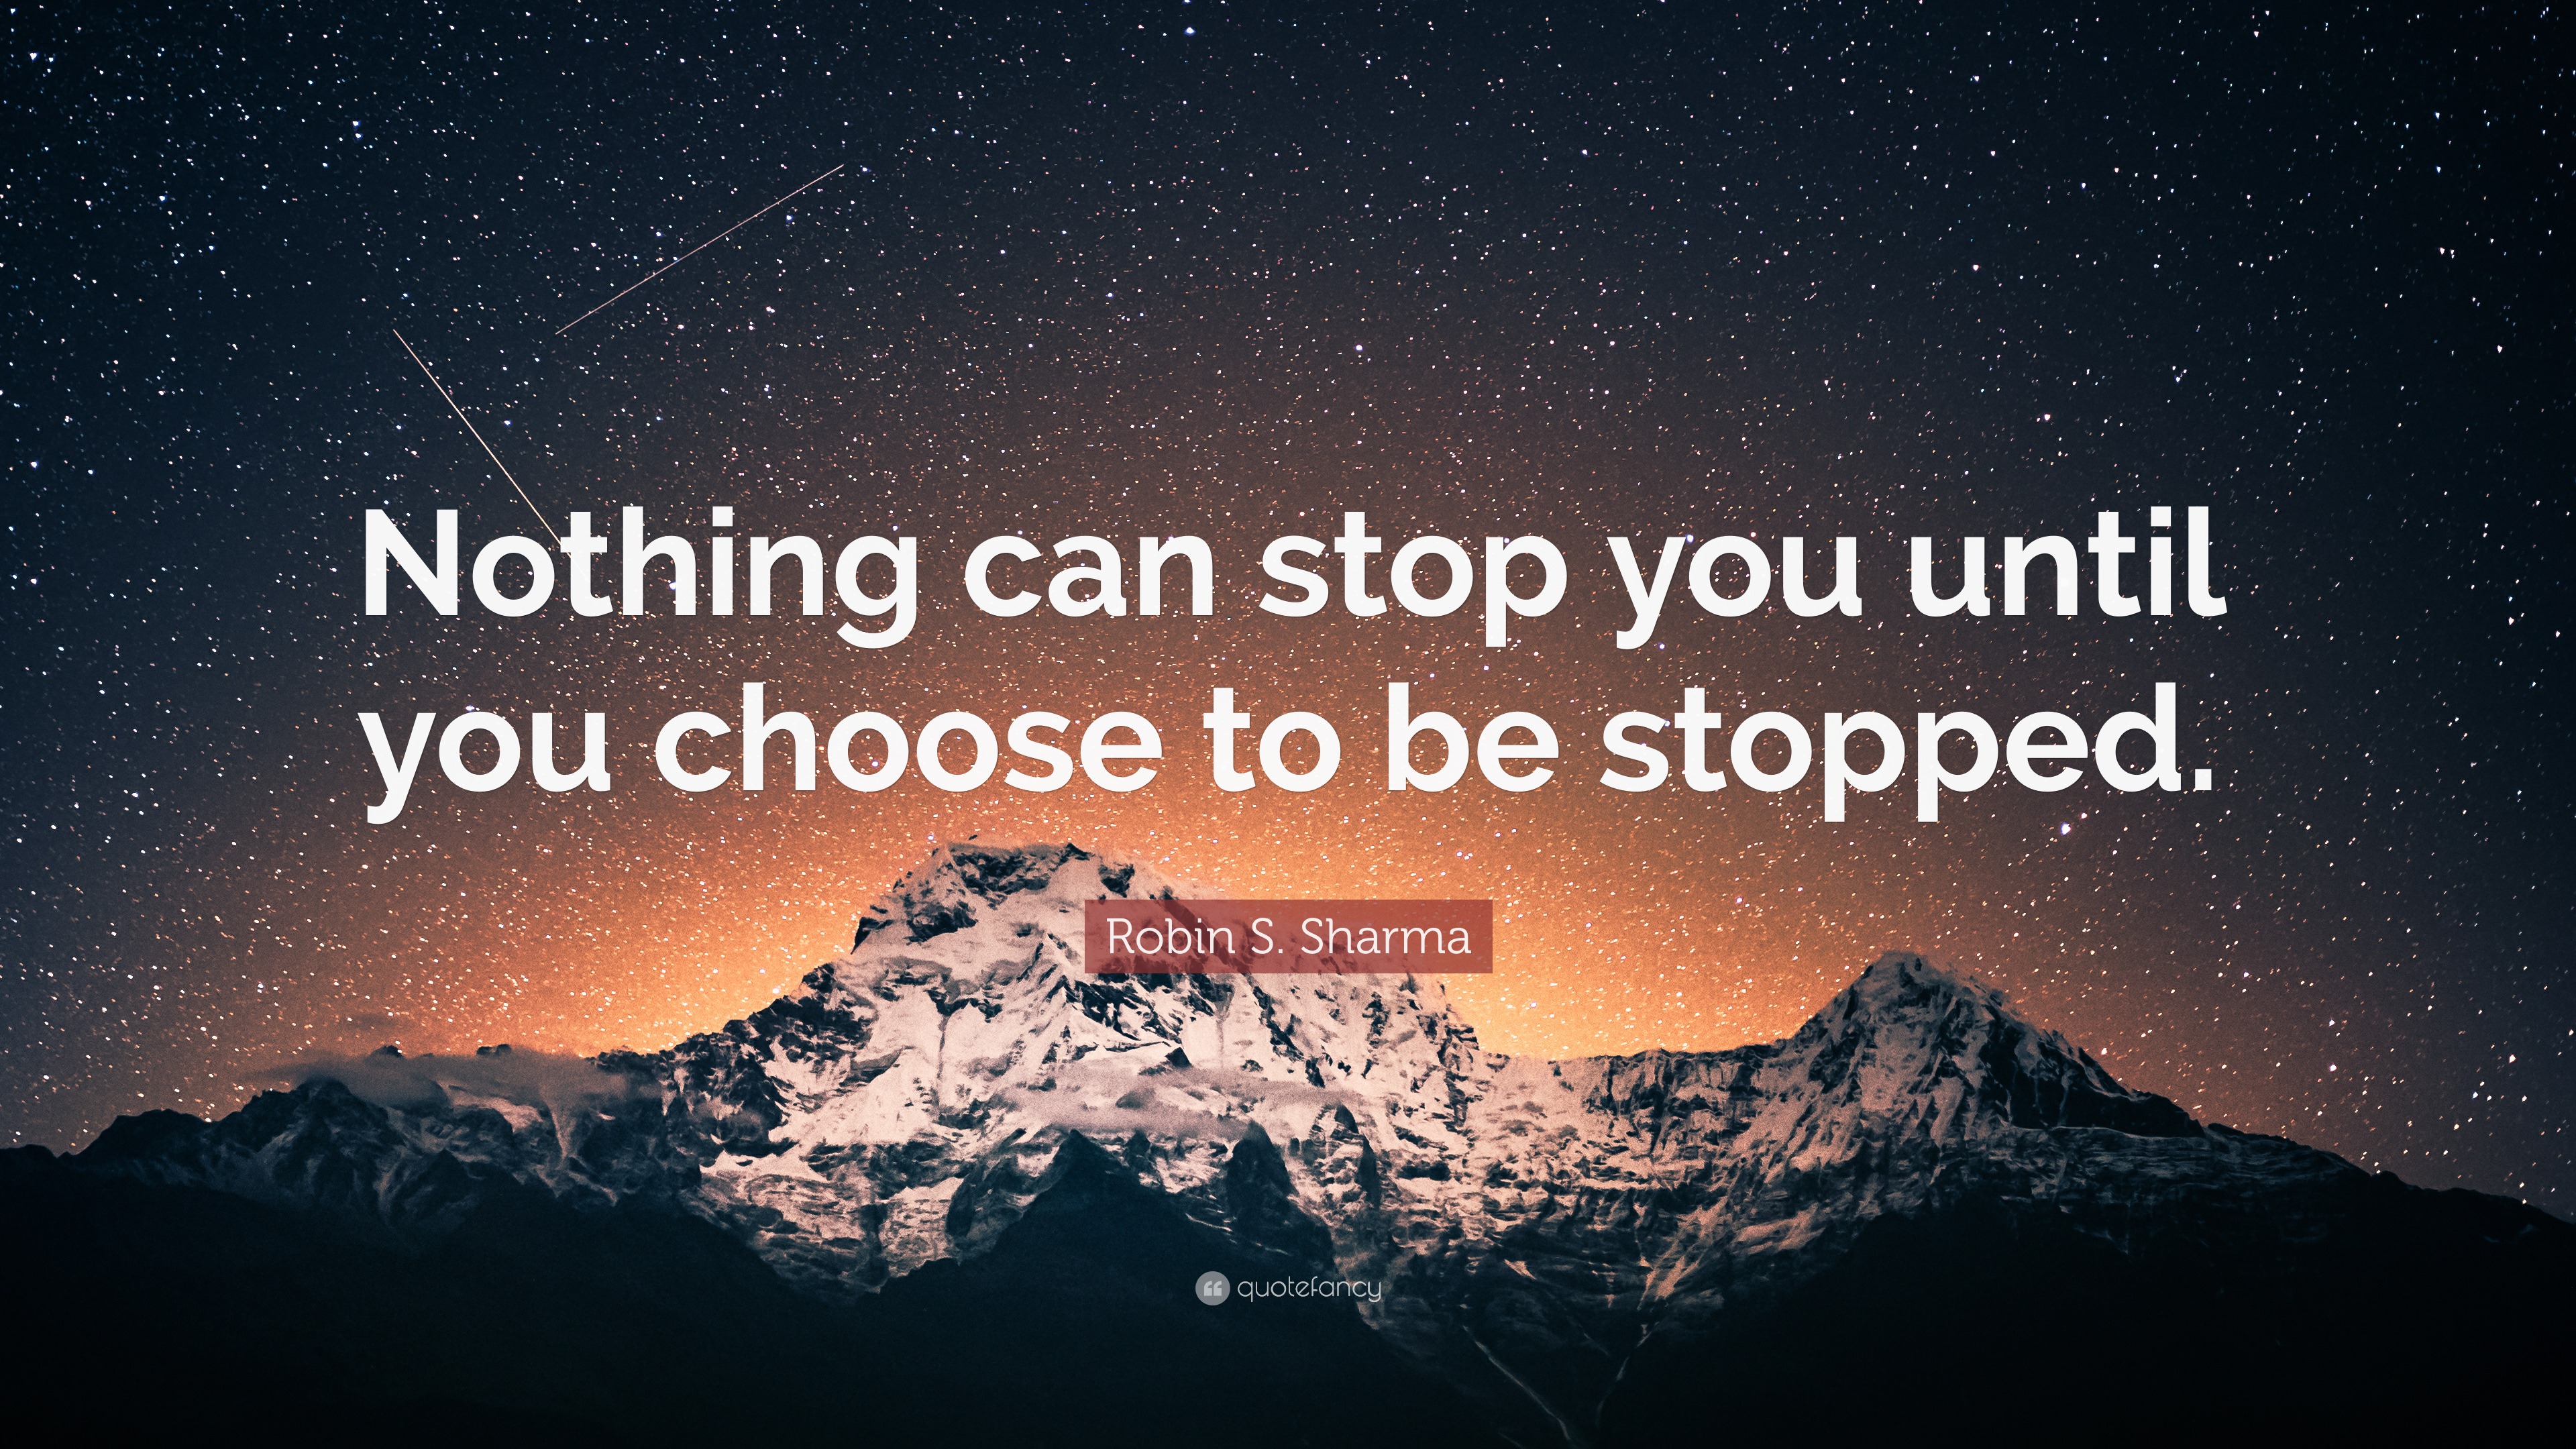 Robin S. Sharma Quote: “Nothing Can Stop You Until You Choose To Be Stopped .”